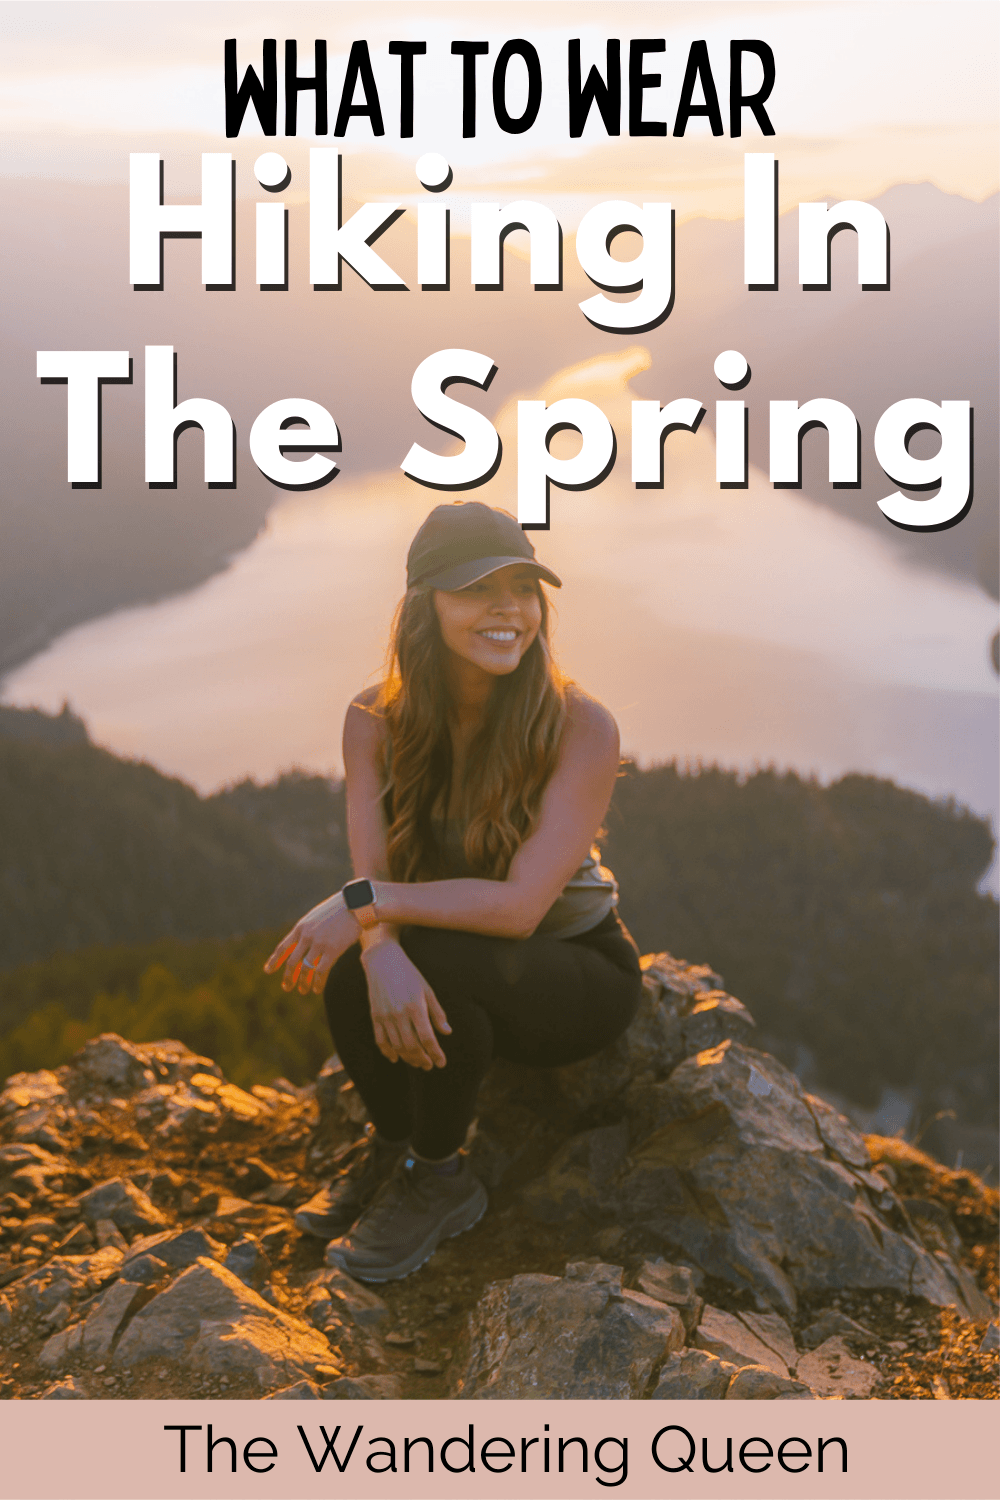 What To Wear Hiking as a Woman  Hiking outfit women, Cute hiking